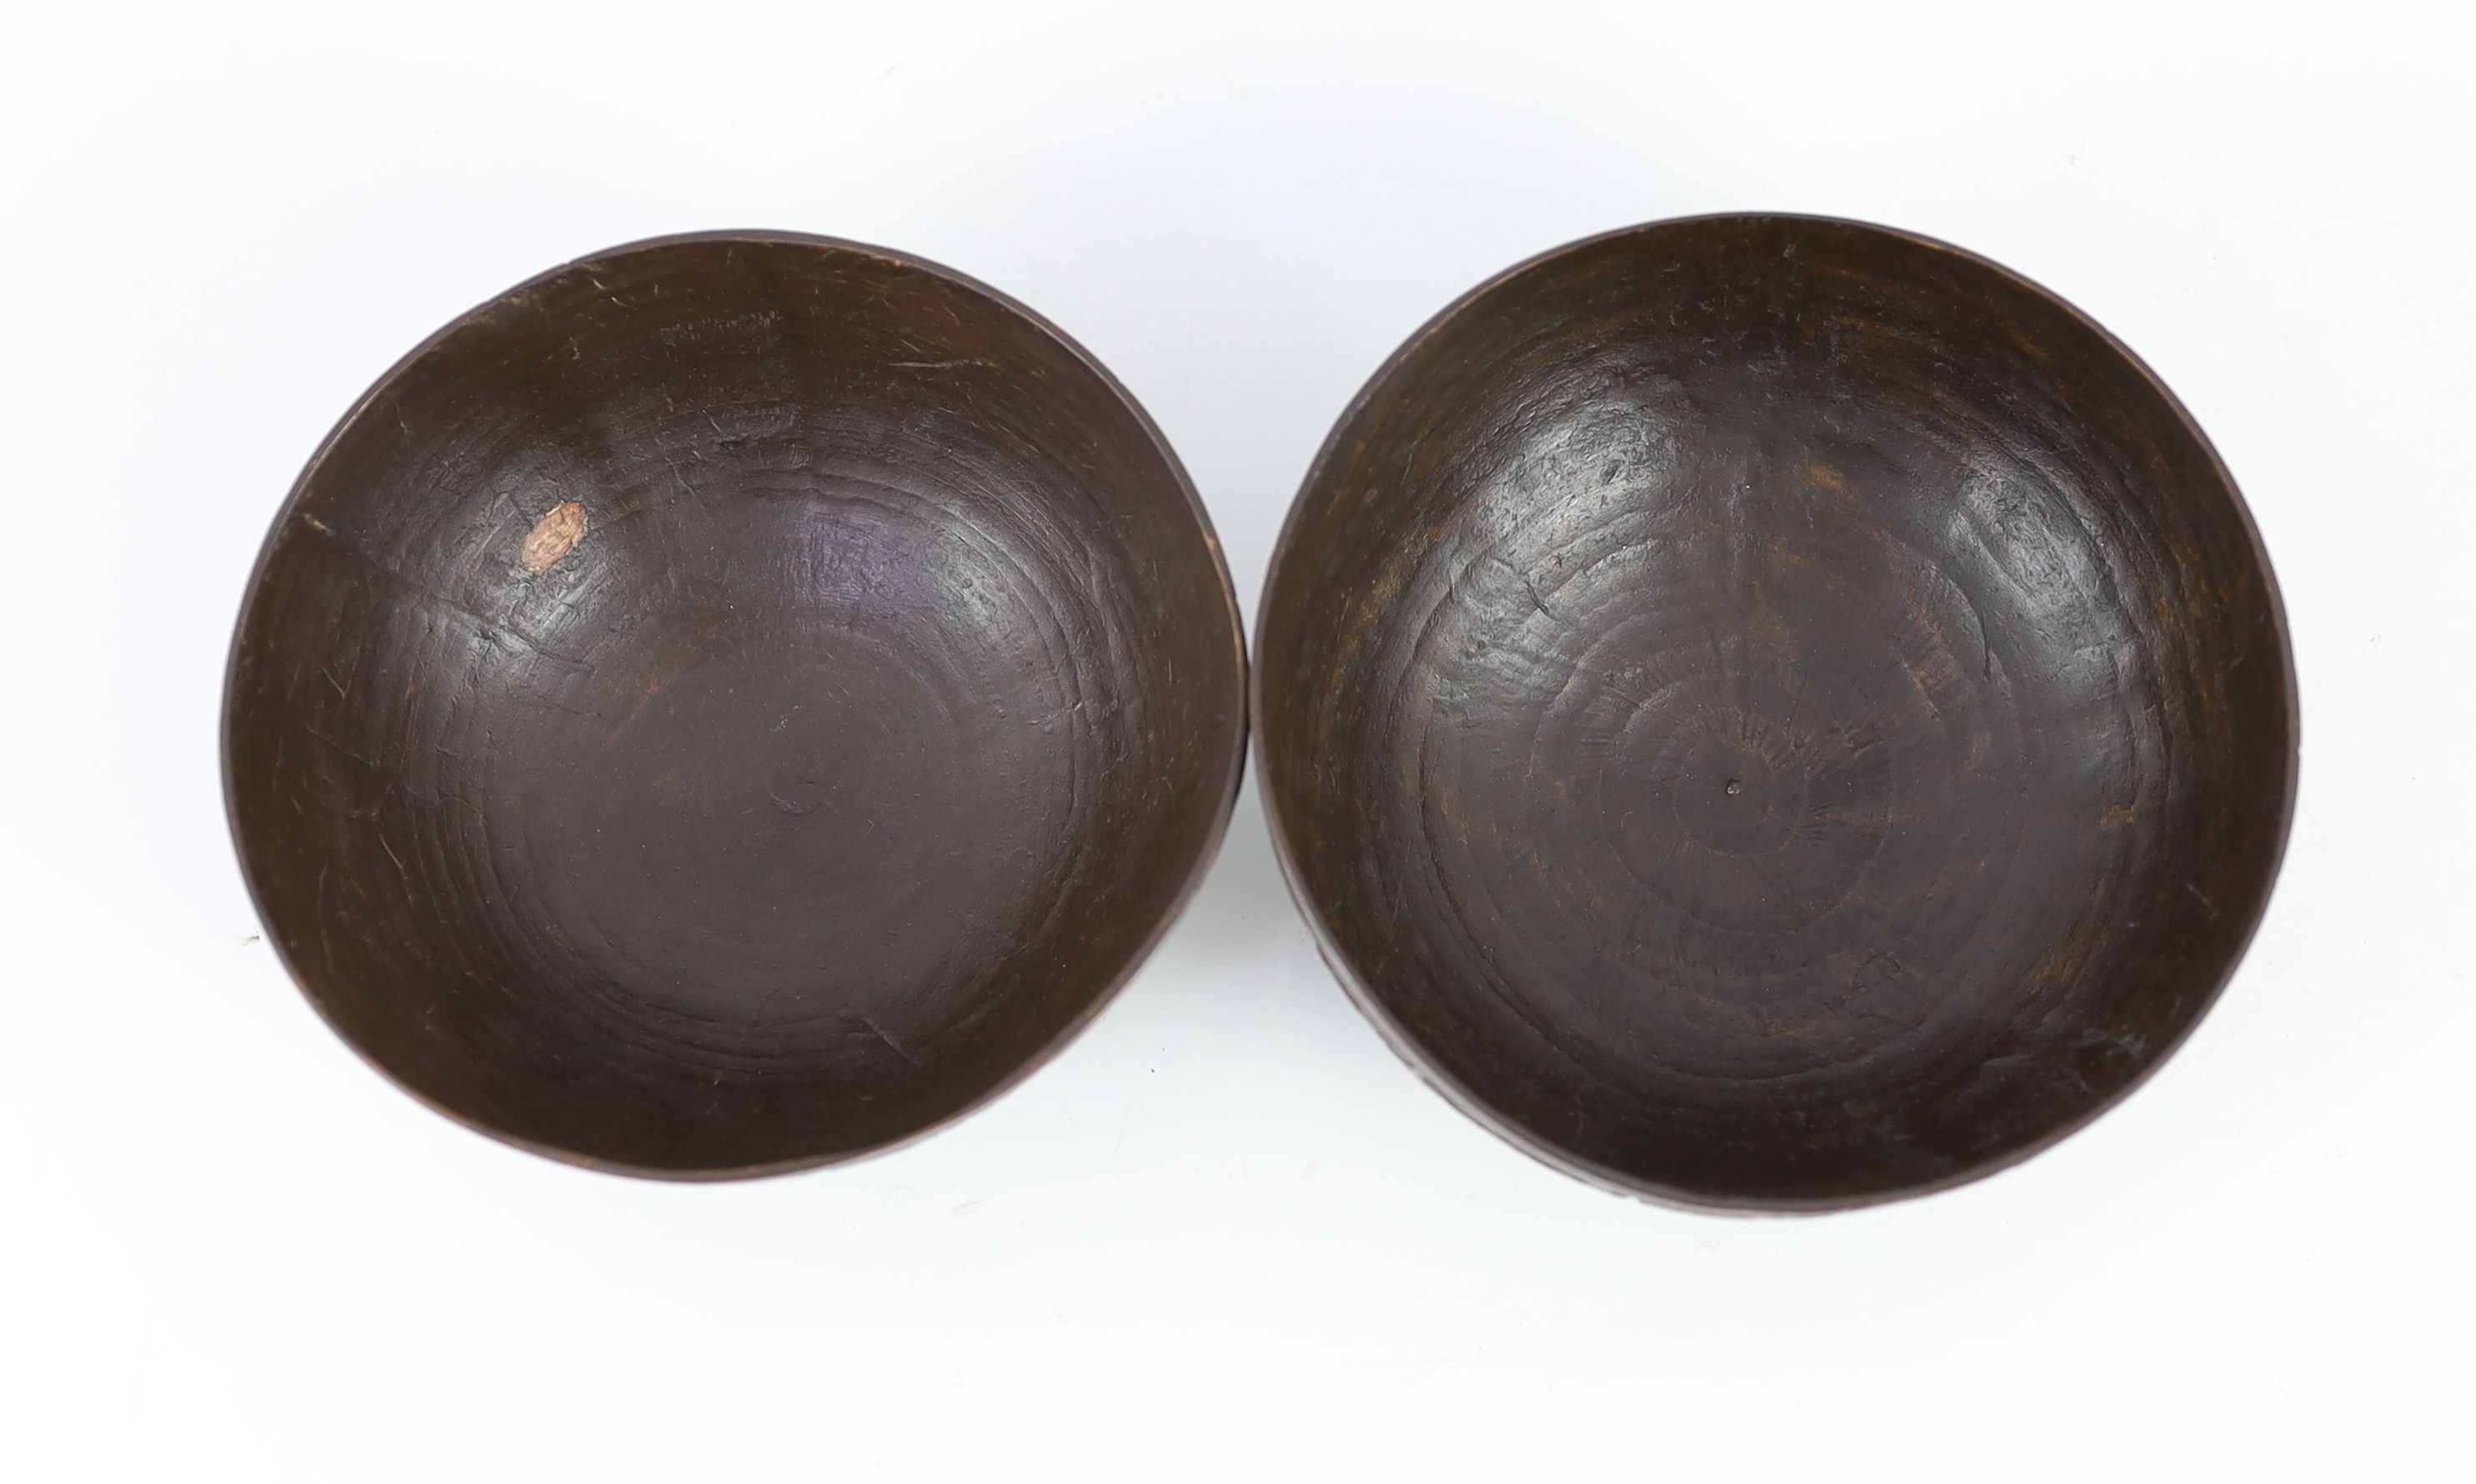 A pair of Chinese coconut bowls, 19th century, Approximately 12 cm diameter